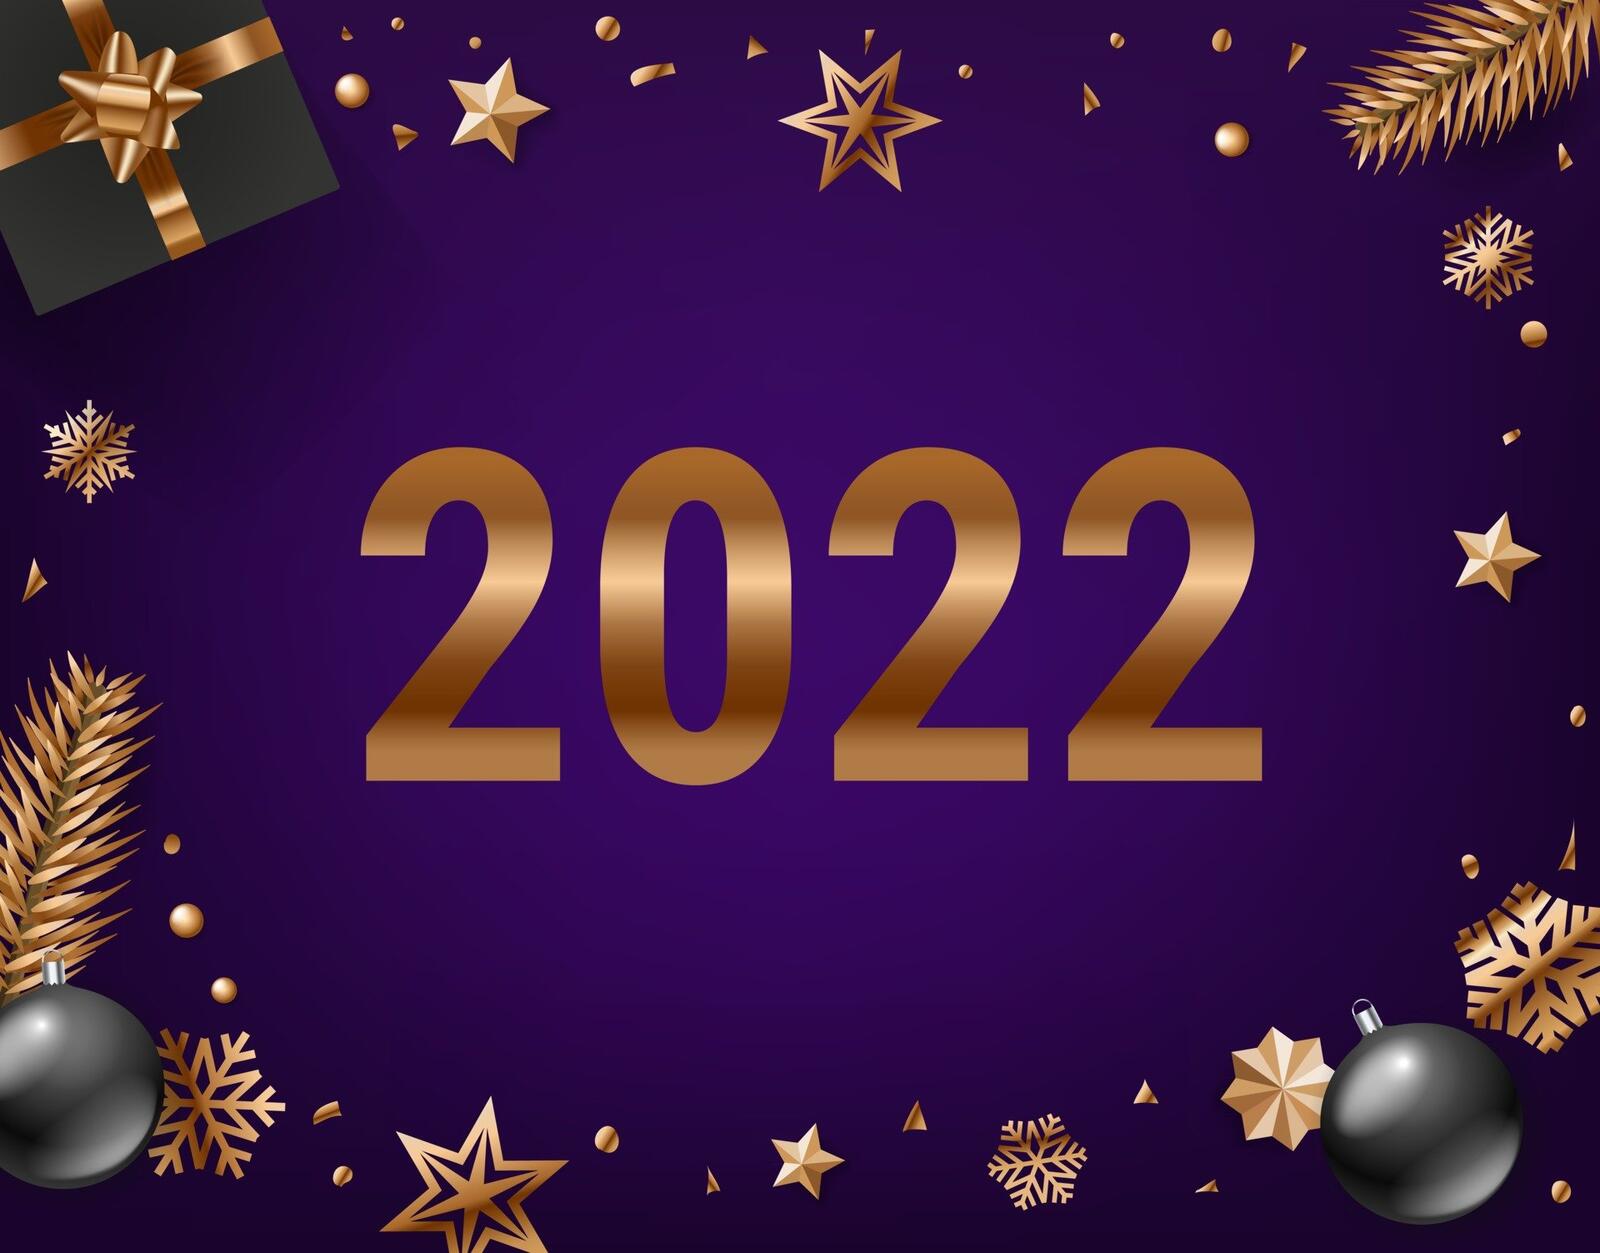 Wallpapers holidays happy new year 2022 holiday on the desktop